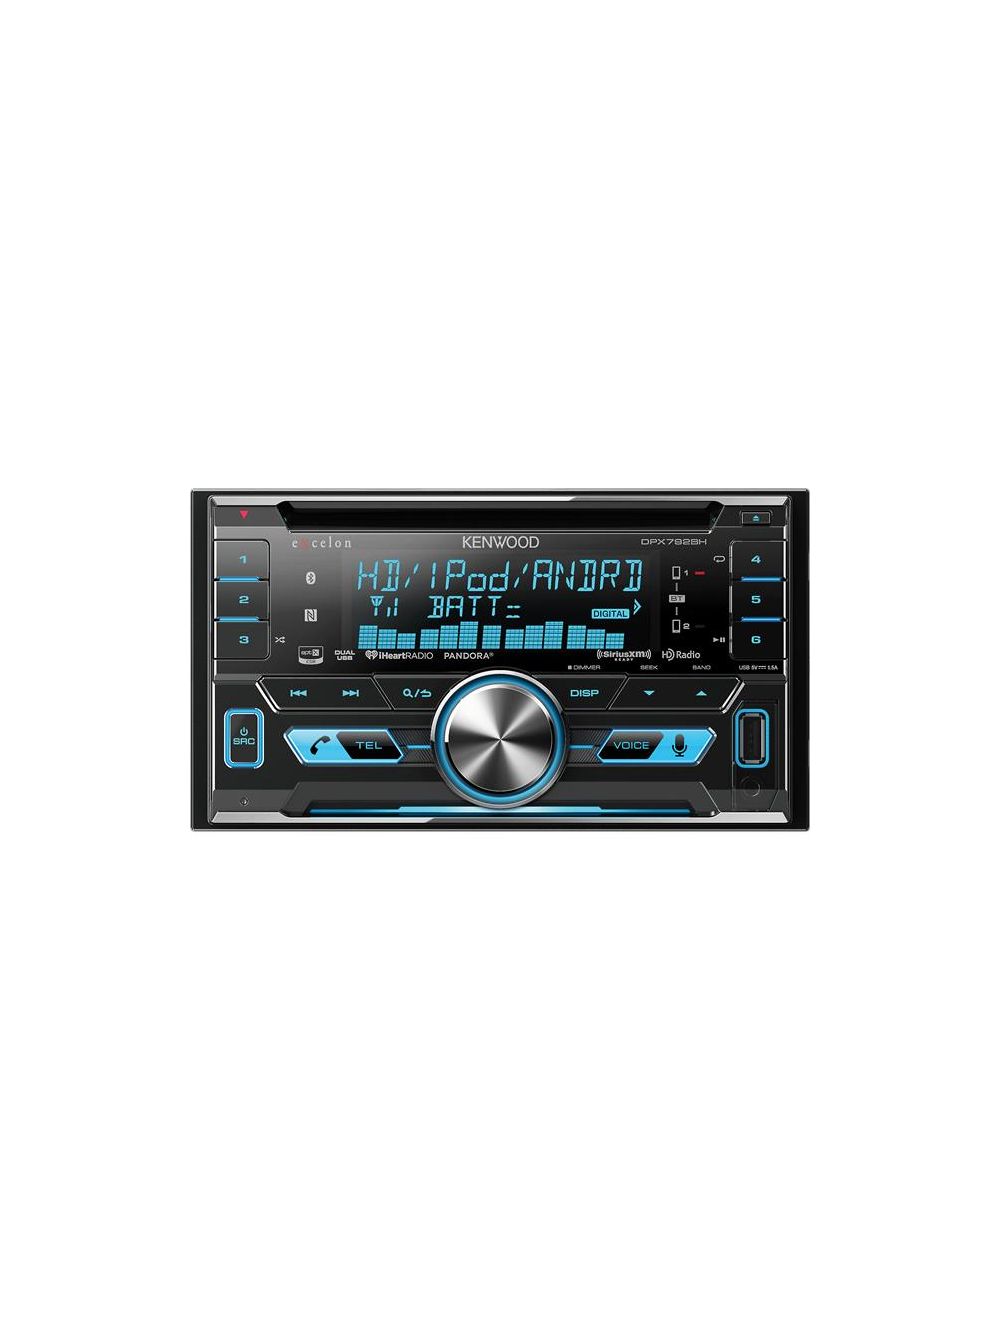 Kenwood Excelon DPX792BH CD receiver